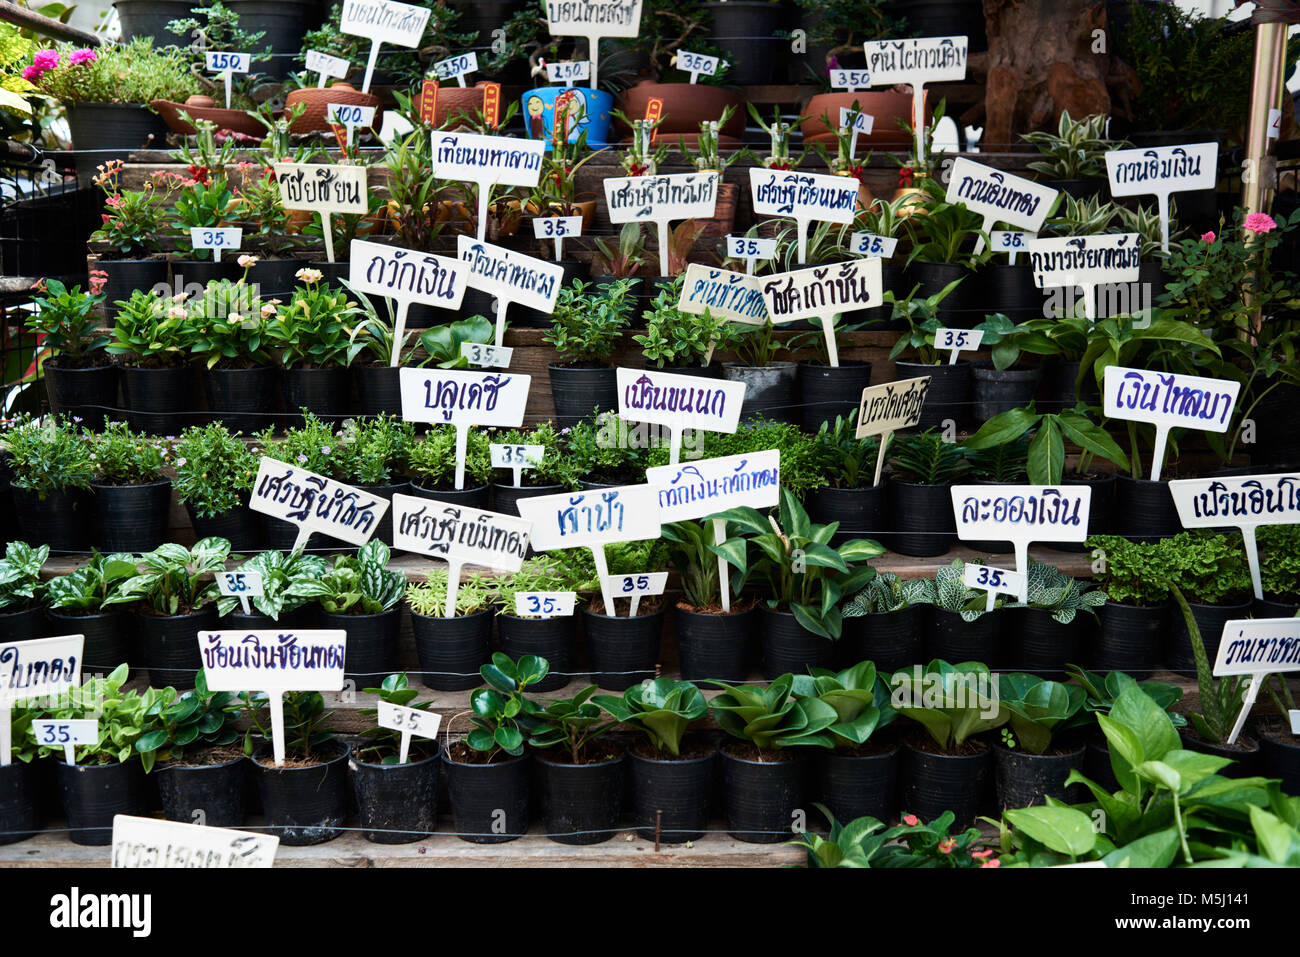 Gardening street stand with many different green plants and its names handwritten in thai, Bangkok Thailand. Stock Photo